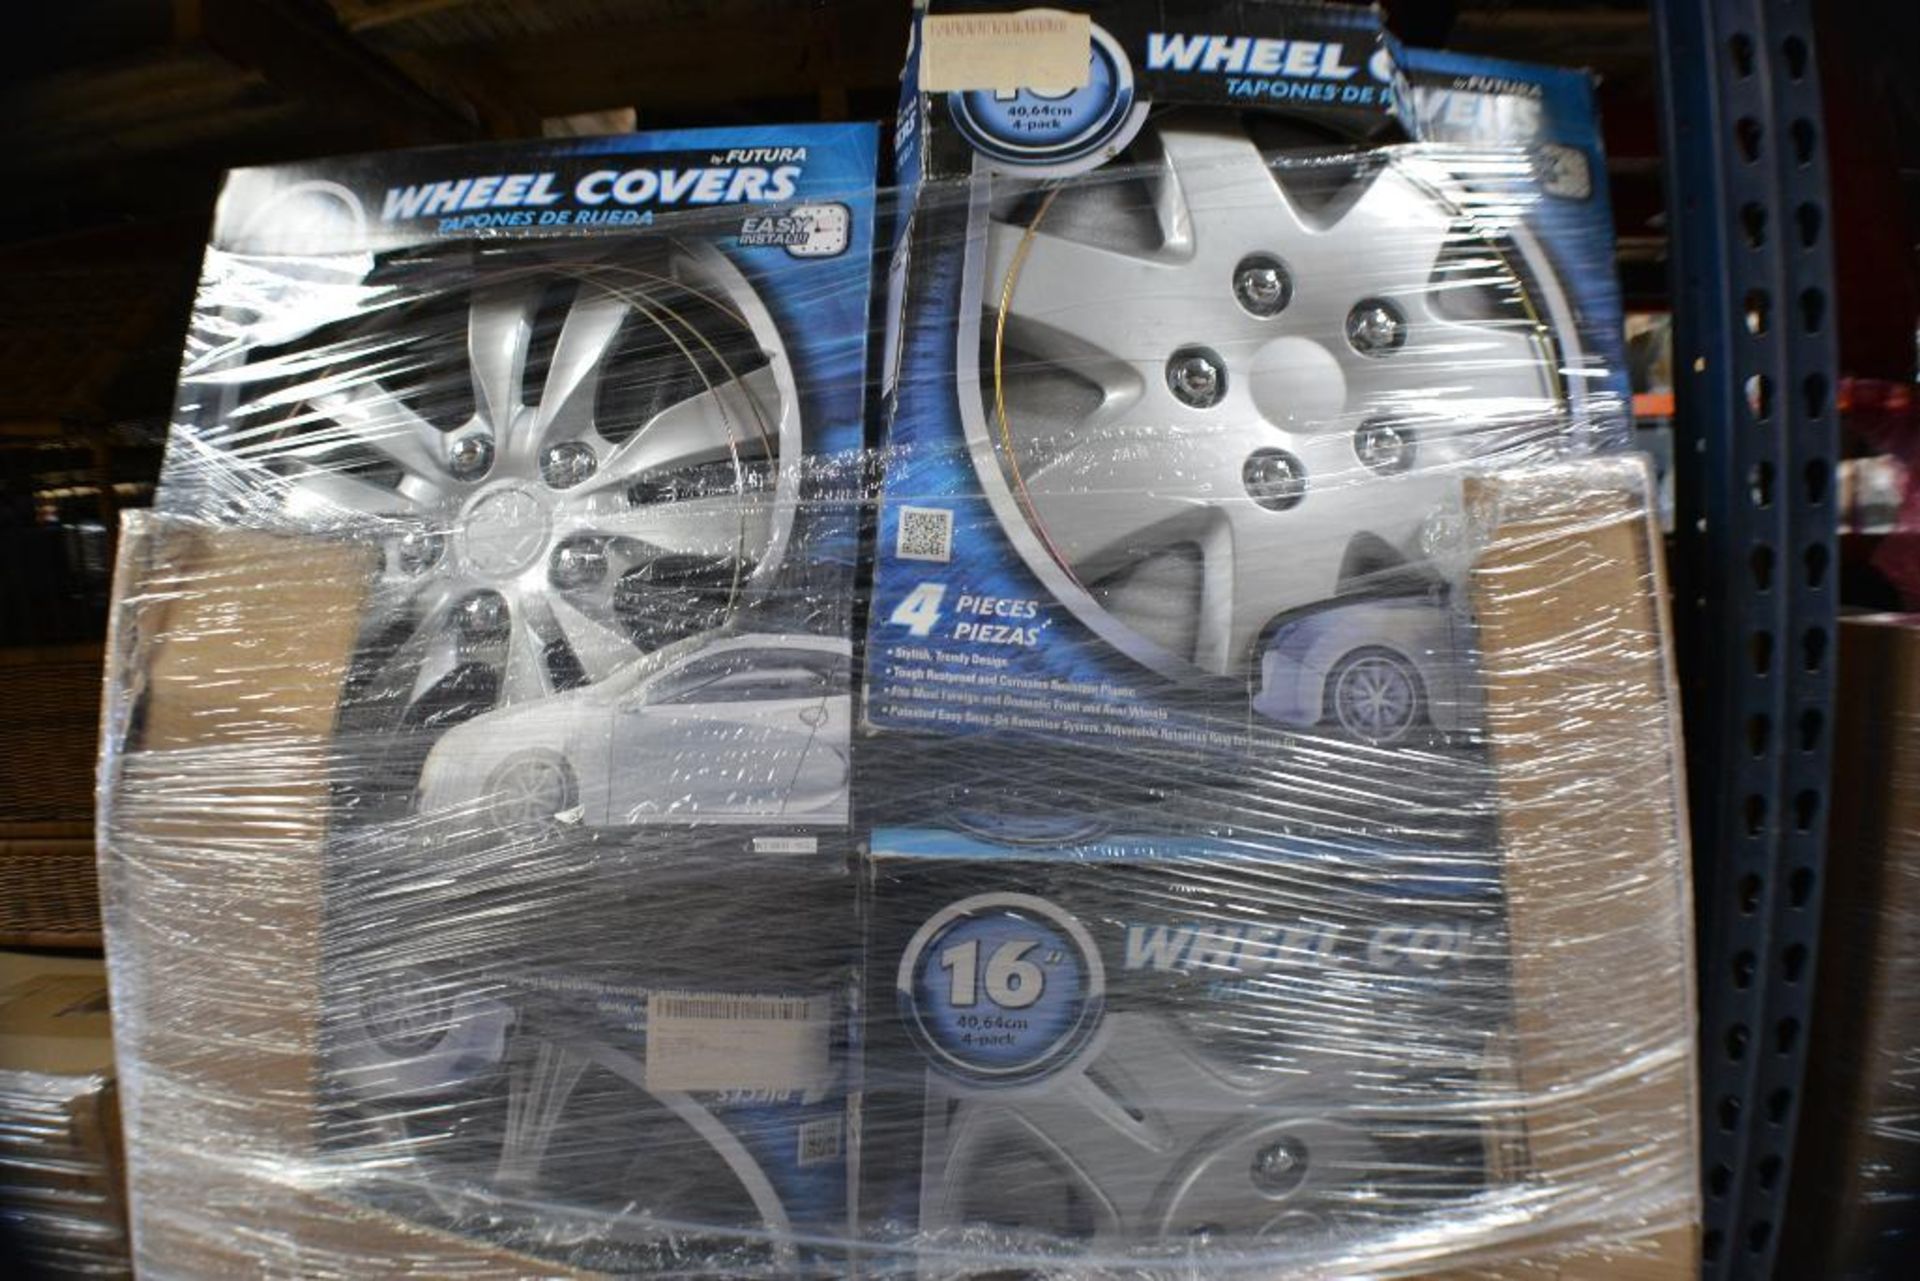 Wheel Covers. Assorted Sizes & Styles. Contents of Gaylord - Image 2 of 2